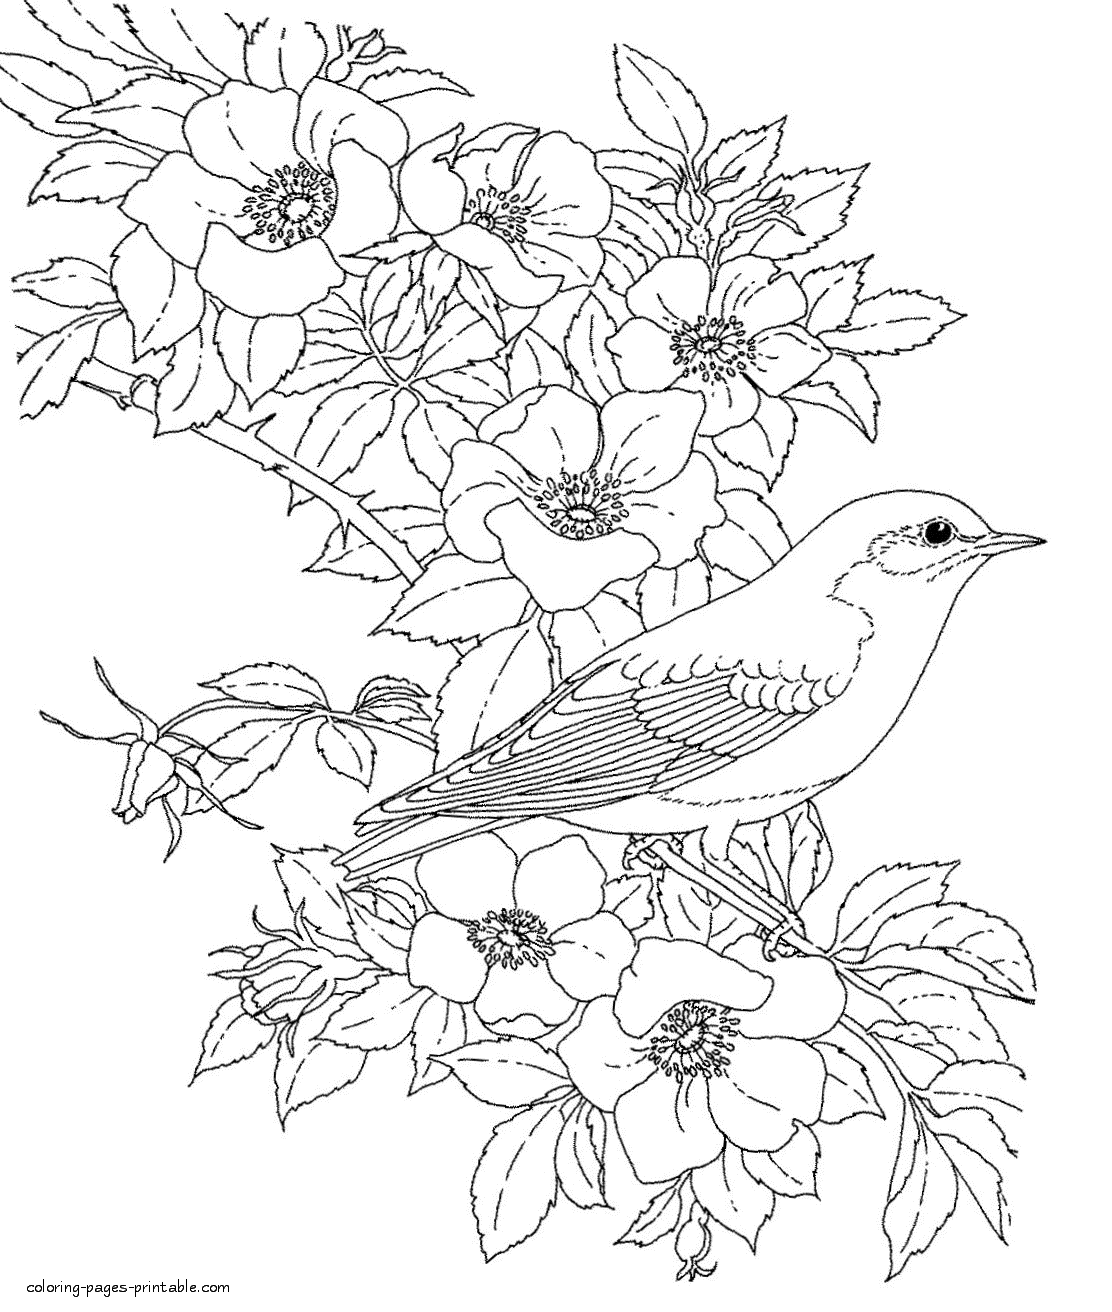 Detailed Adult Coloring Pages Birds Coloring Pages